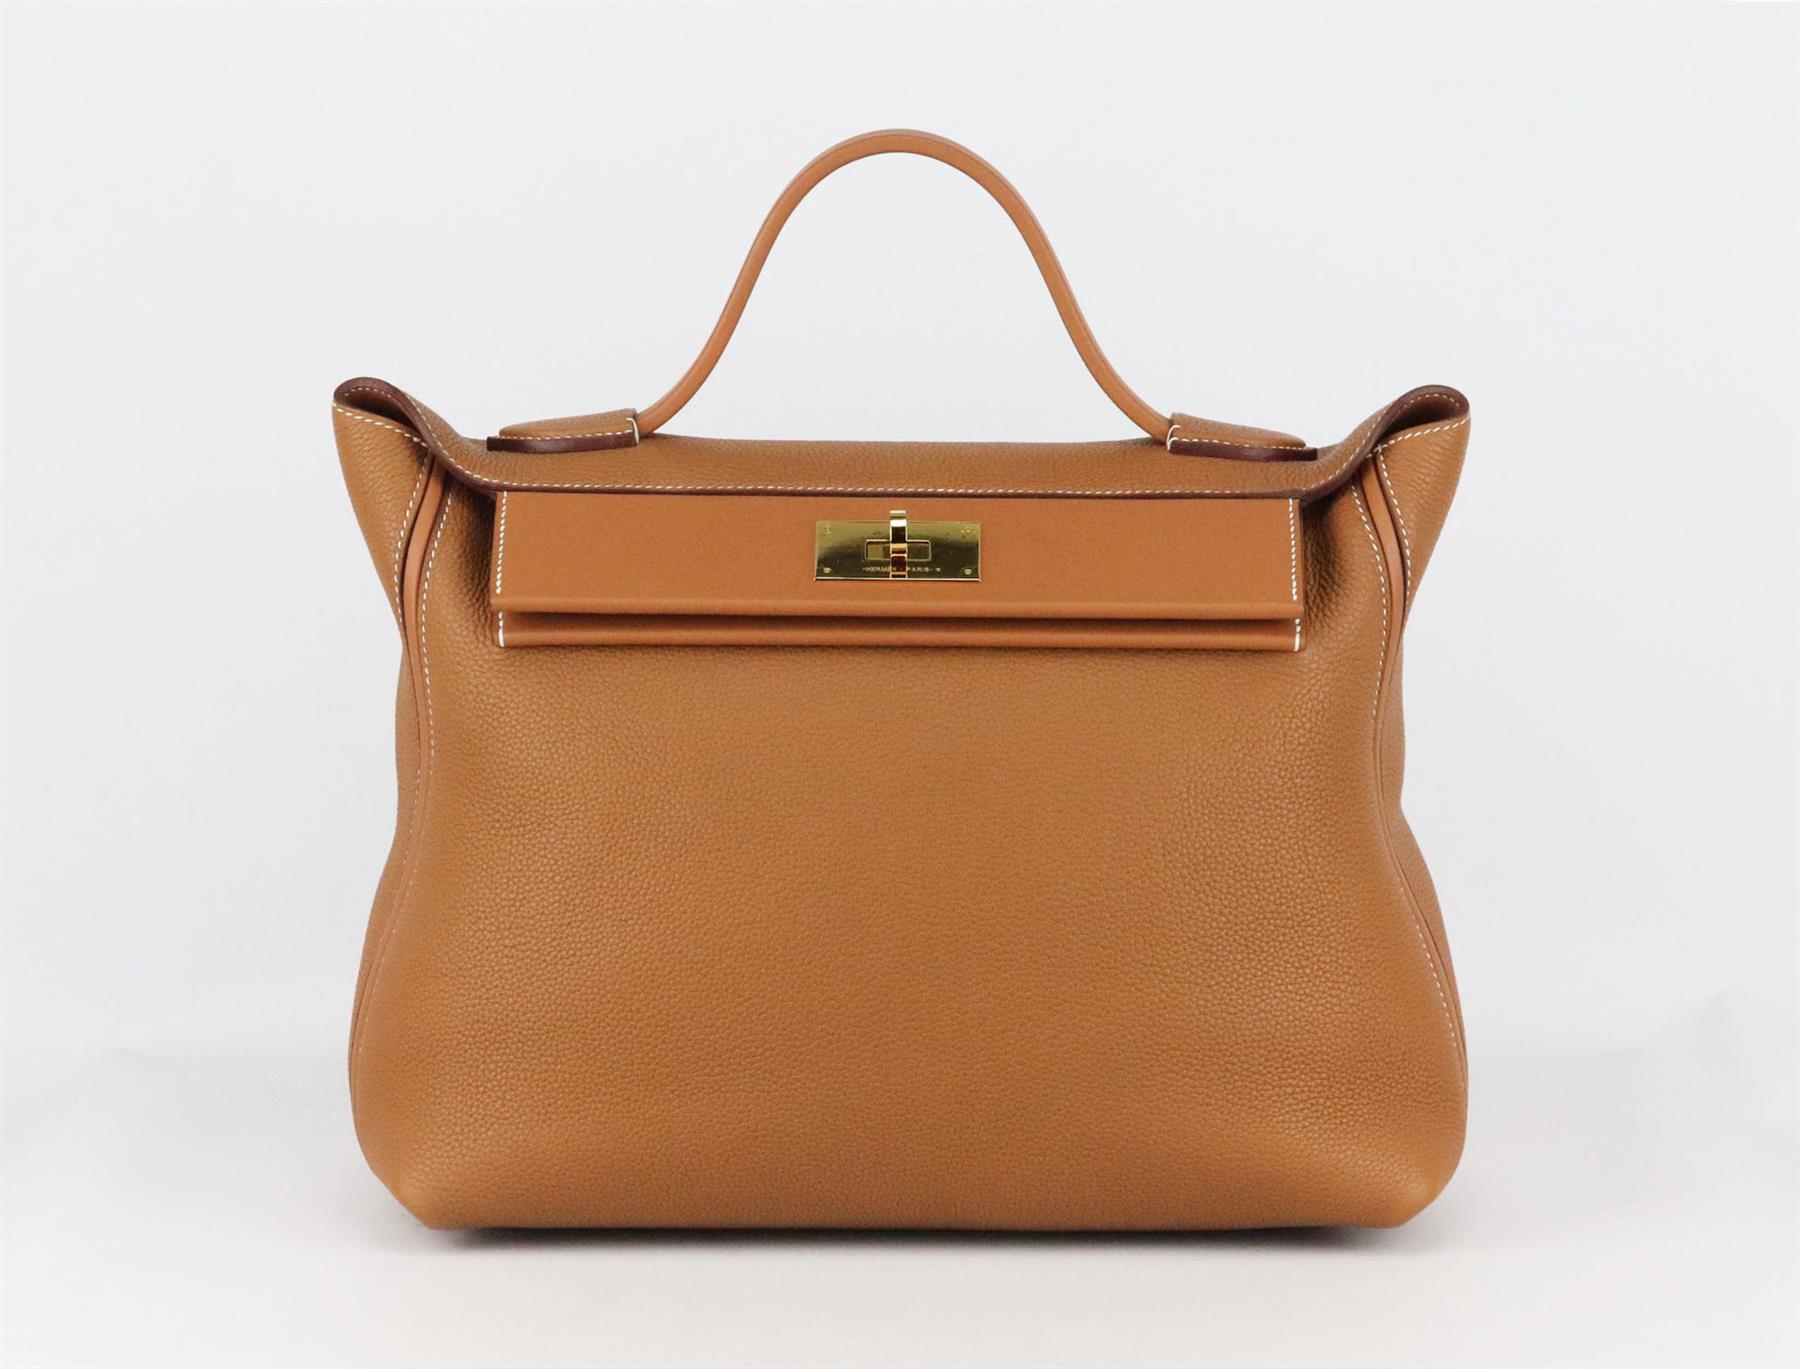 <ul>
<li>Made in France, this beautiful 2019 Hermès ‘24/24’ 35cm handbag has been made from soft tan Taurillon Maurice and Swift leather exterior and Swift leather interior, this piece is decorated with gold hardware on the front and finished with